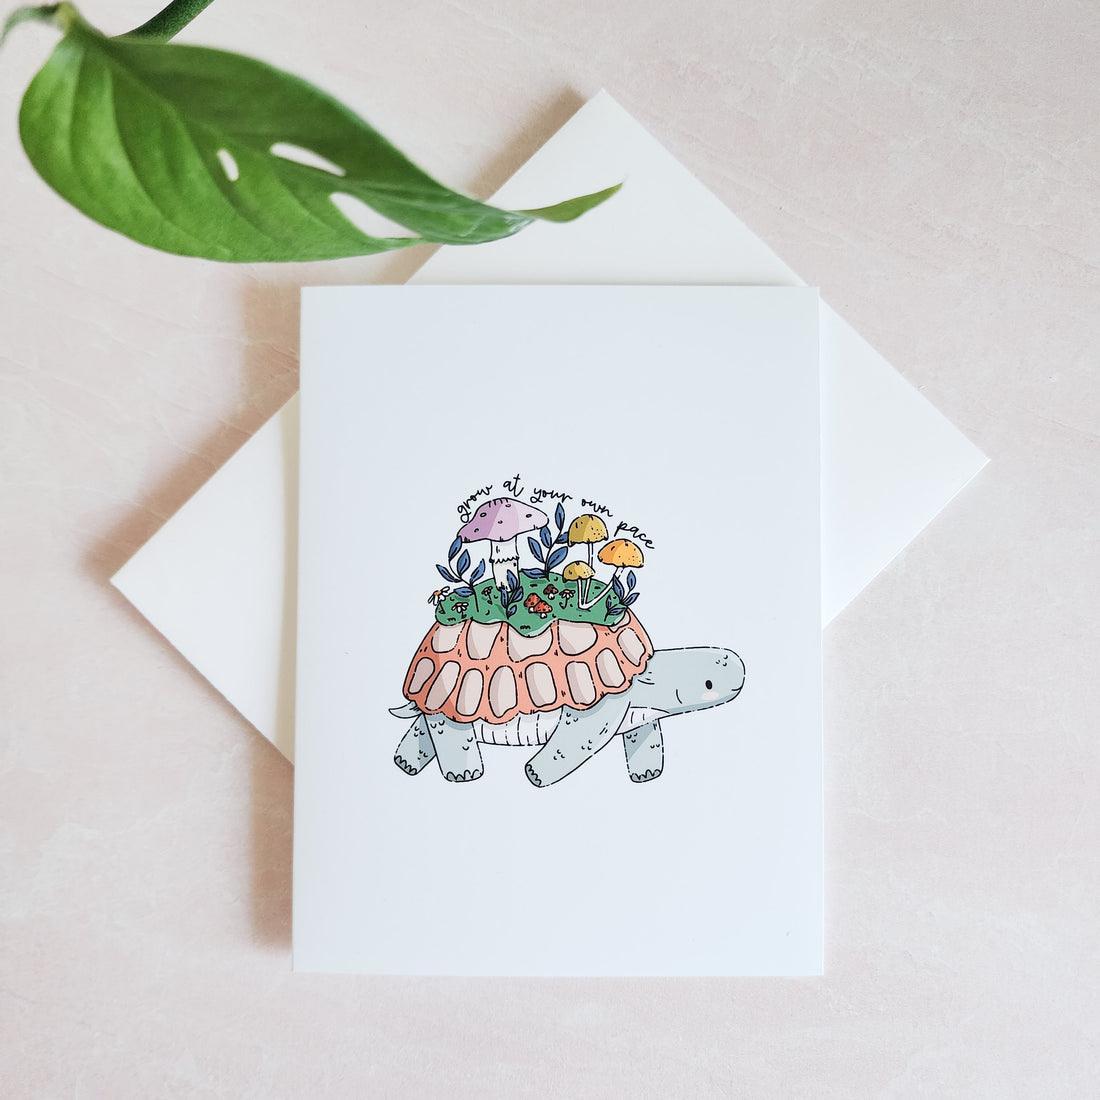 greeting card depicting a turtle with mushrooms on its back on top of a white envelope